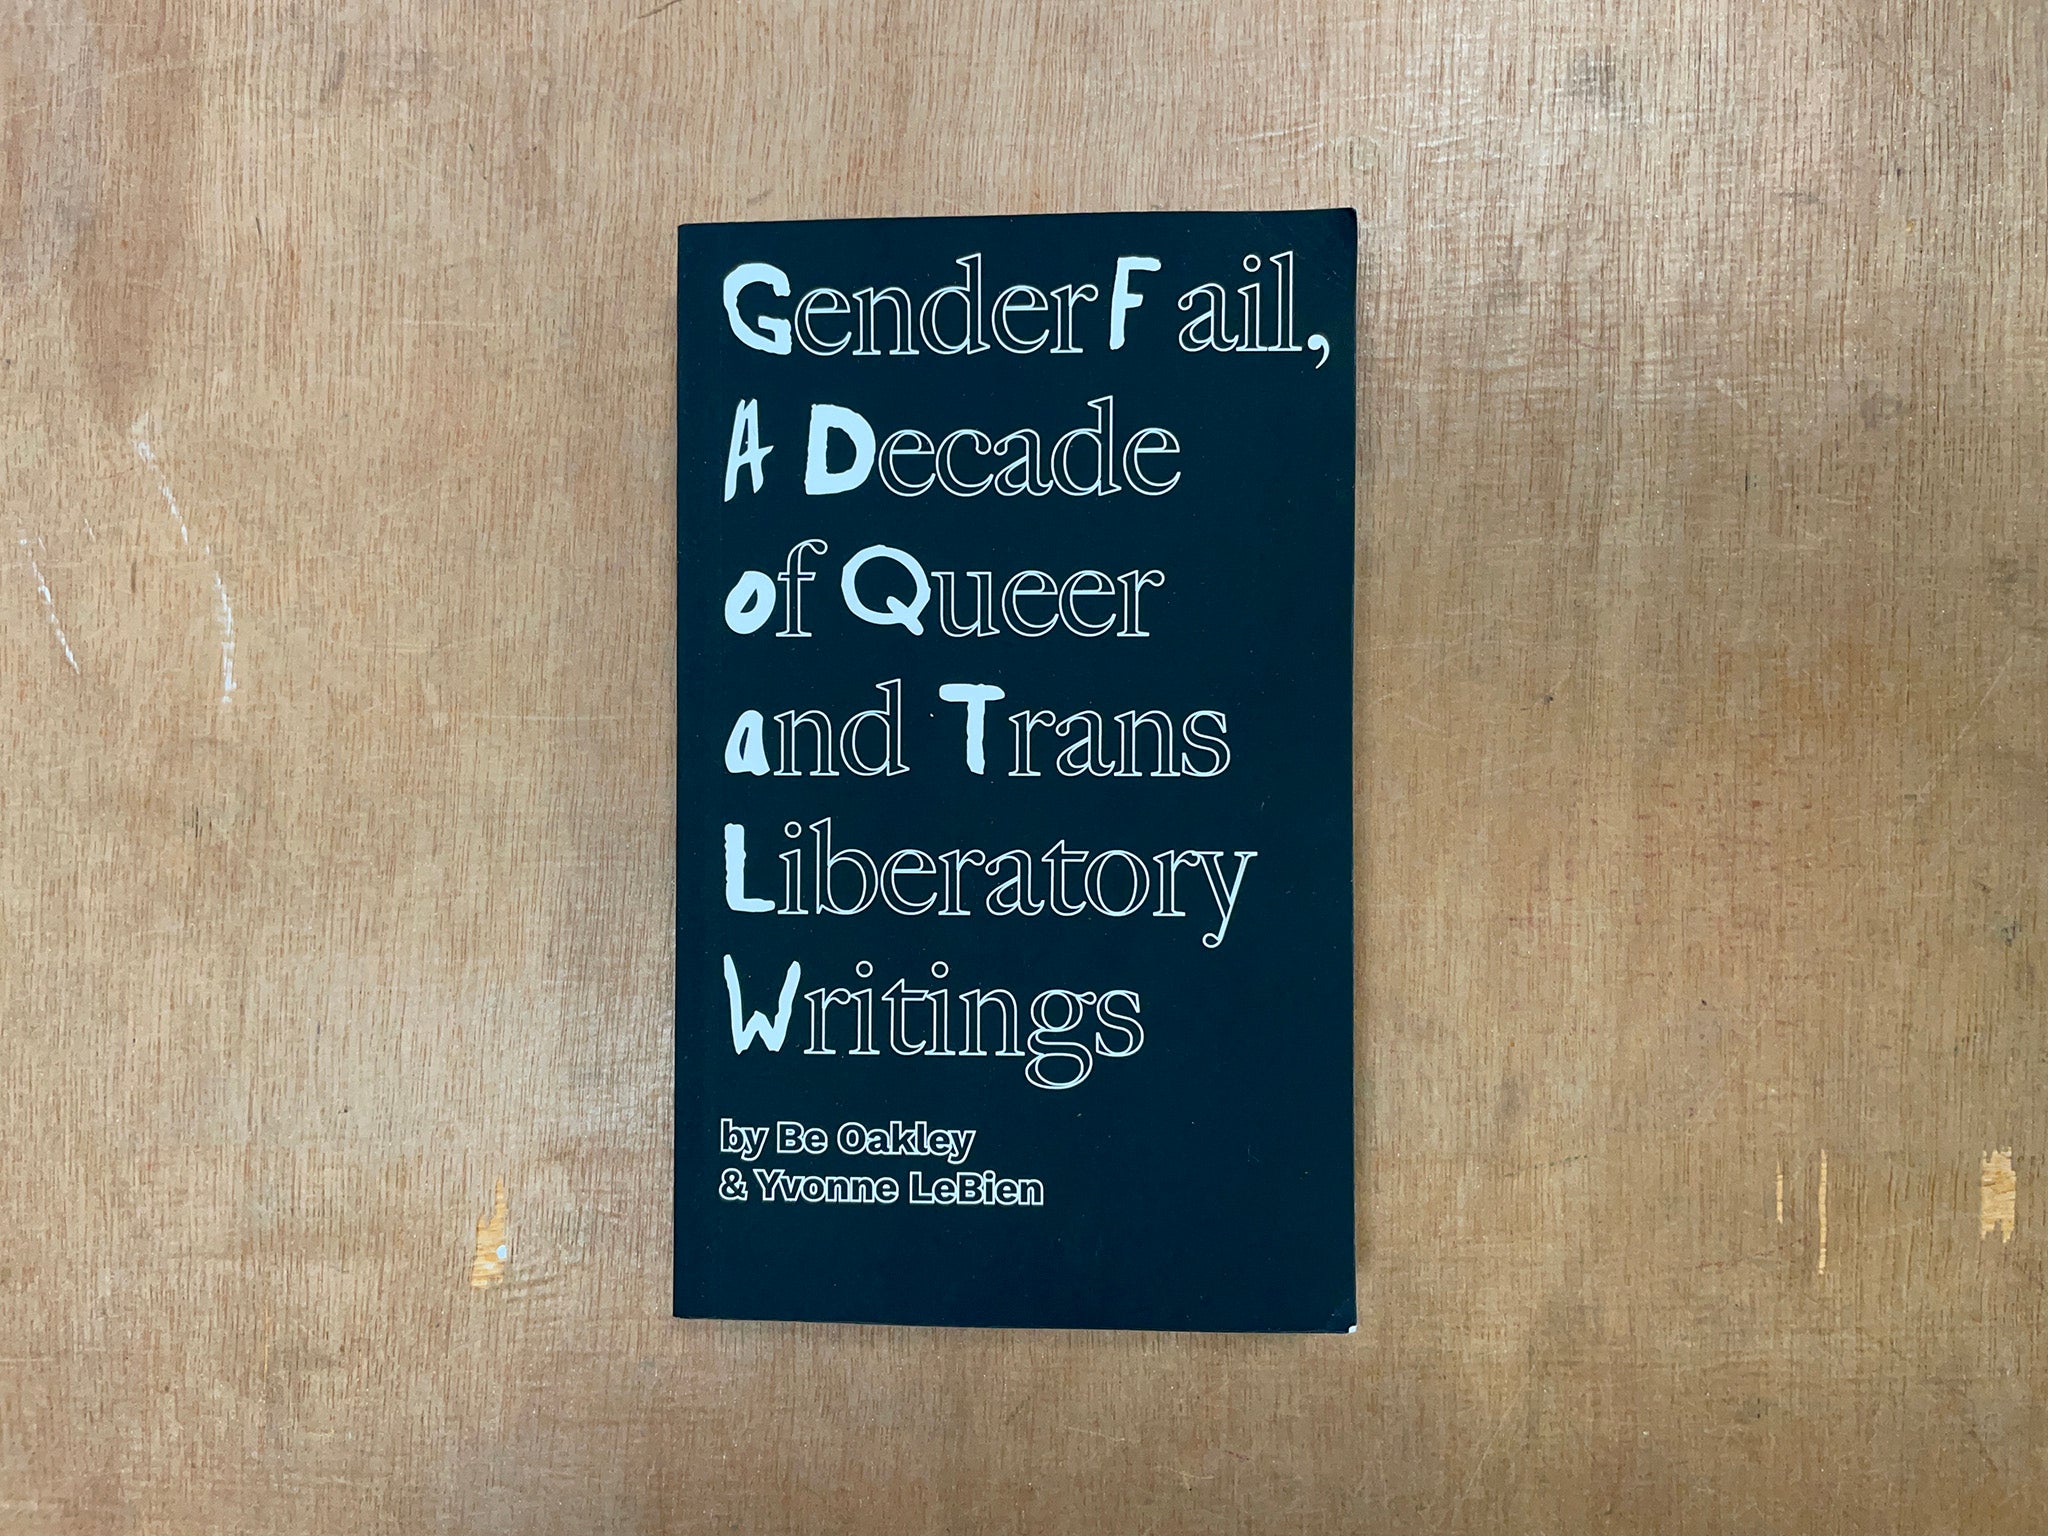 GENDERFAIL, A DECADE OF QUEER AND TRANS LIBERATORY WRITINGS Ed. by Be Oakley